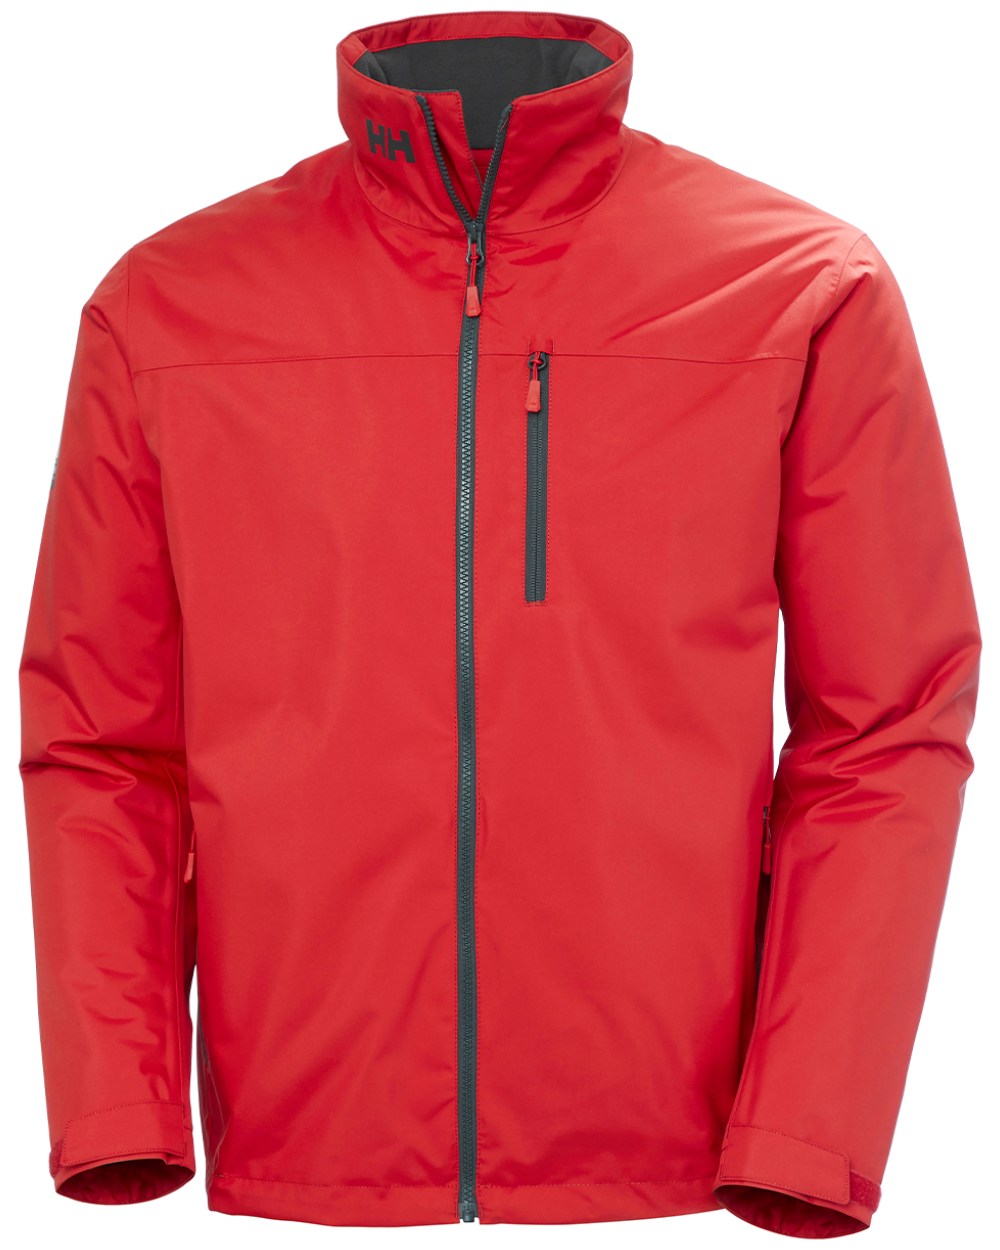 Red Coloured Helly Hansen Mens Crew Midlayer Jacket 2 On A White Background 